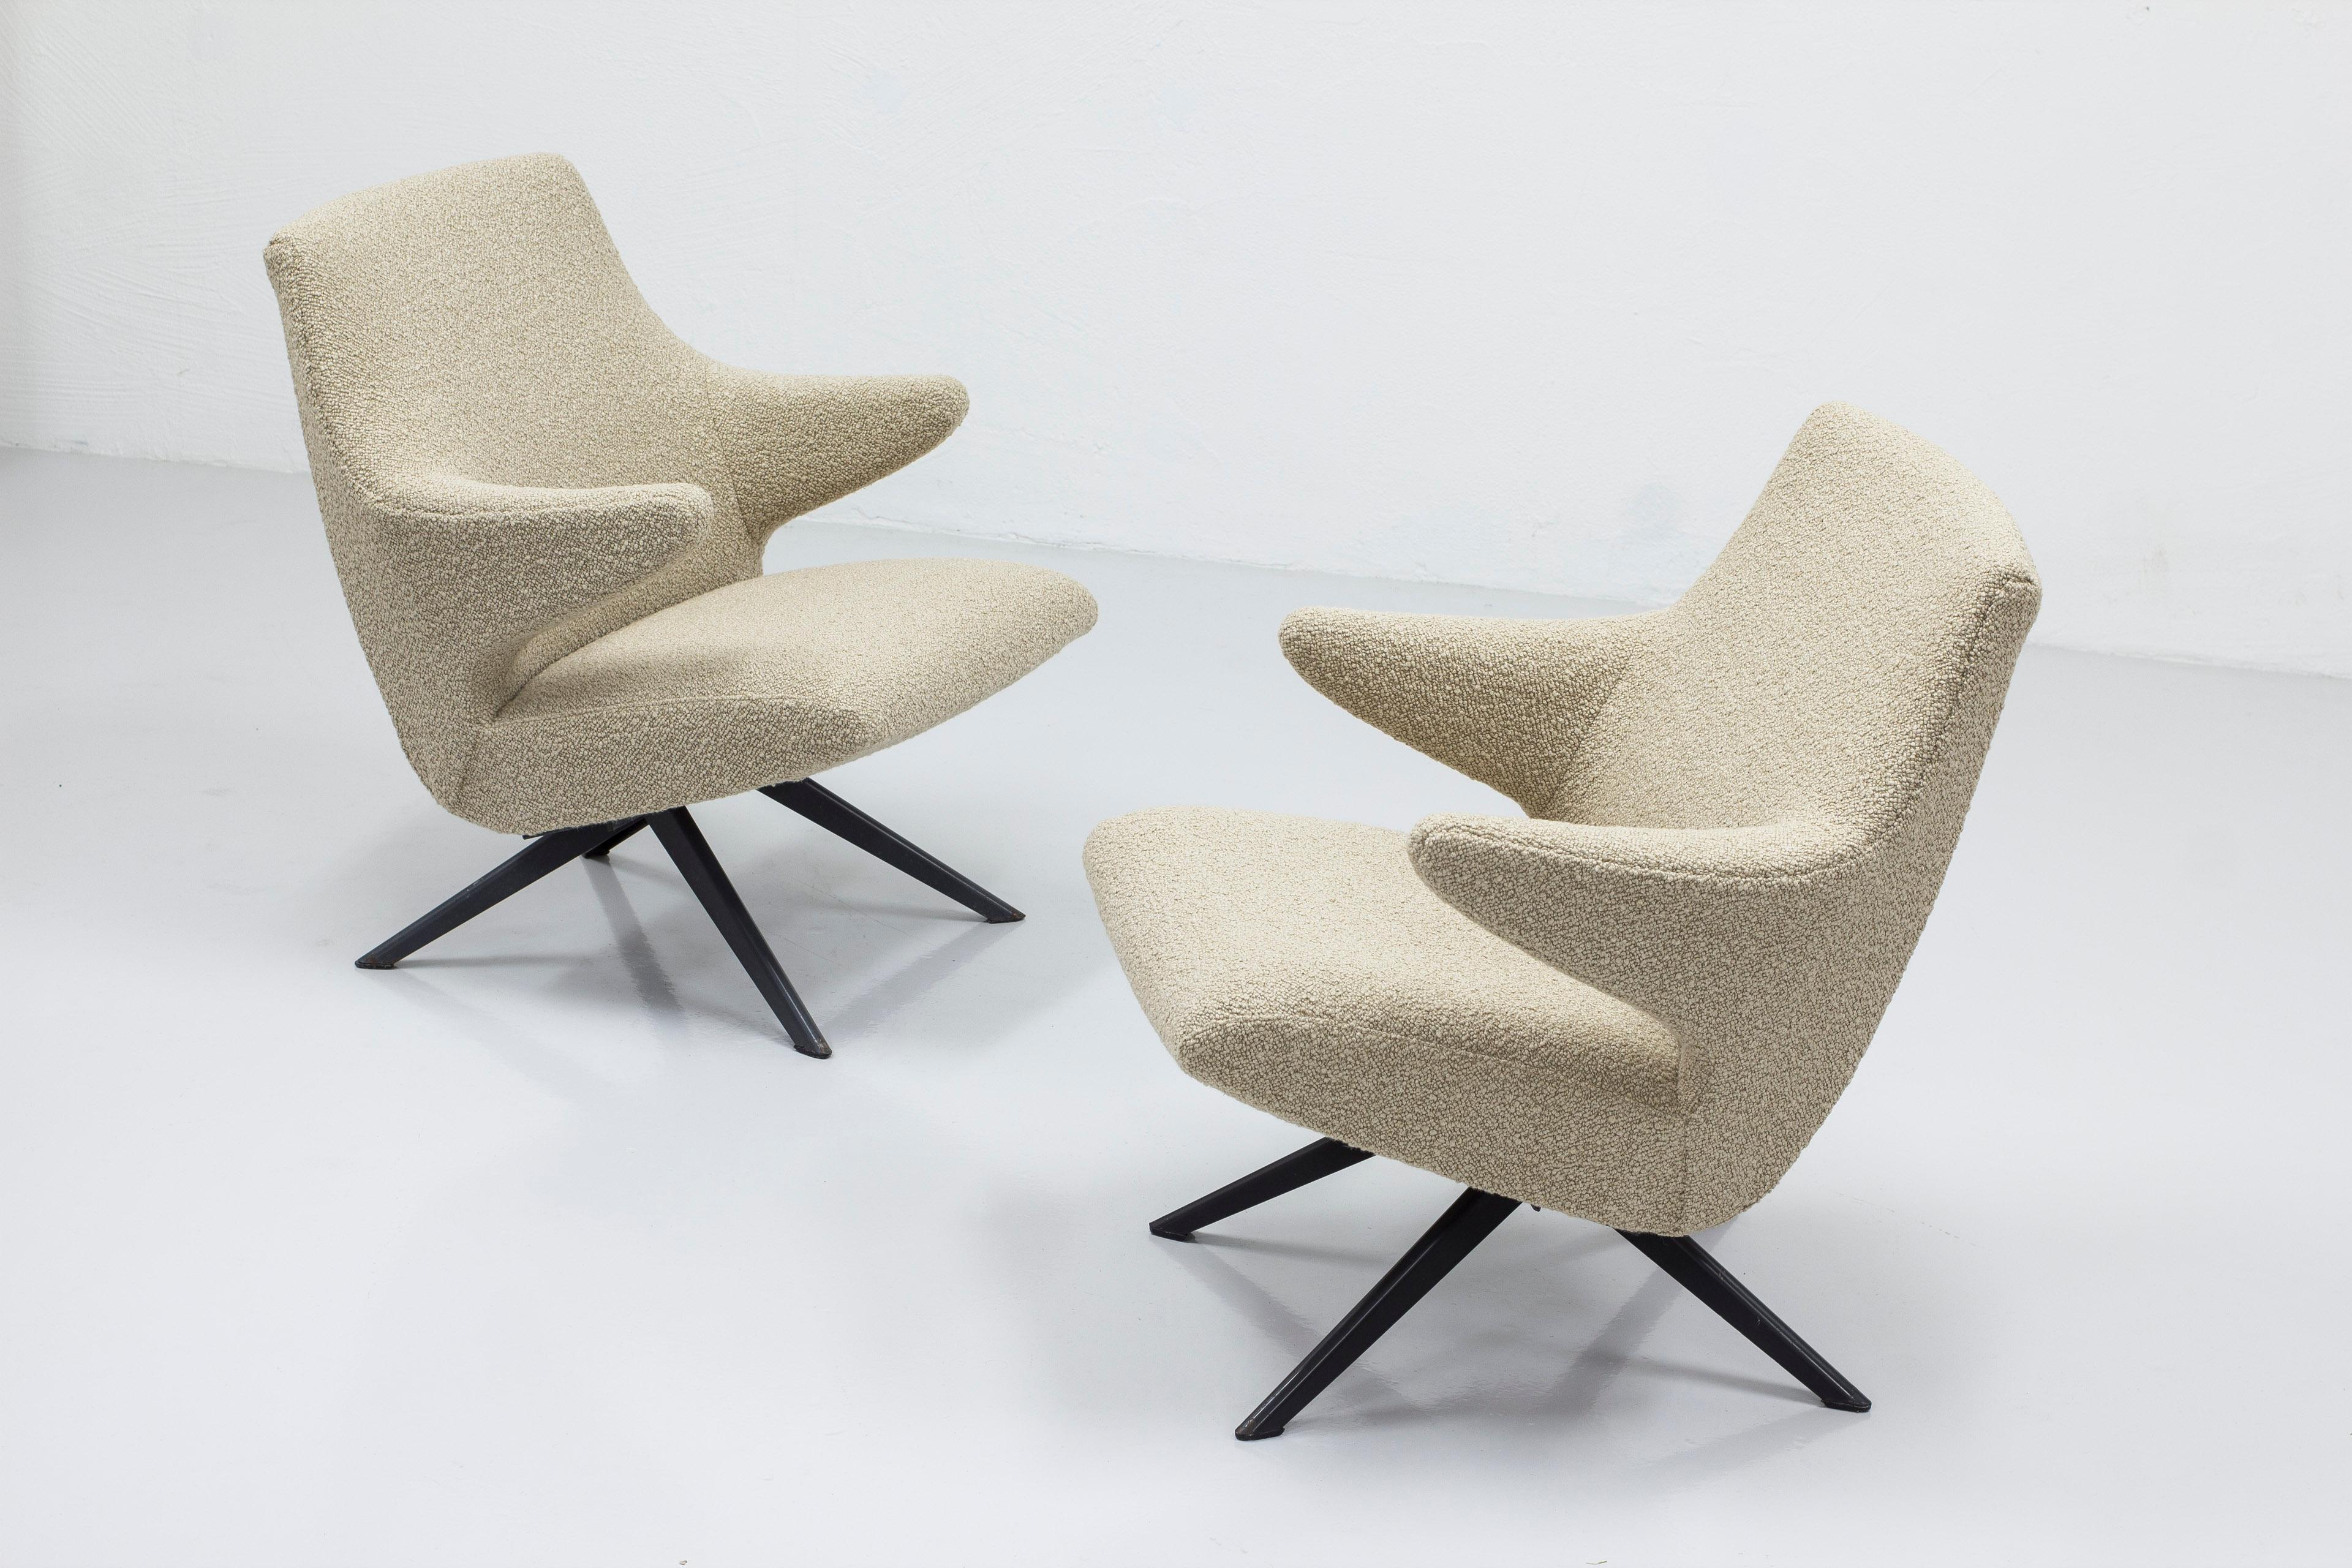 Pair of lounge chairs designed by Bengt Ruda by Nordiska Kompaniet, 1950 In Good Condition For Sale In Hägersten, SE